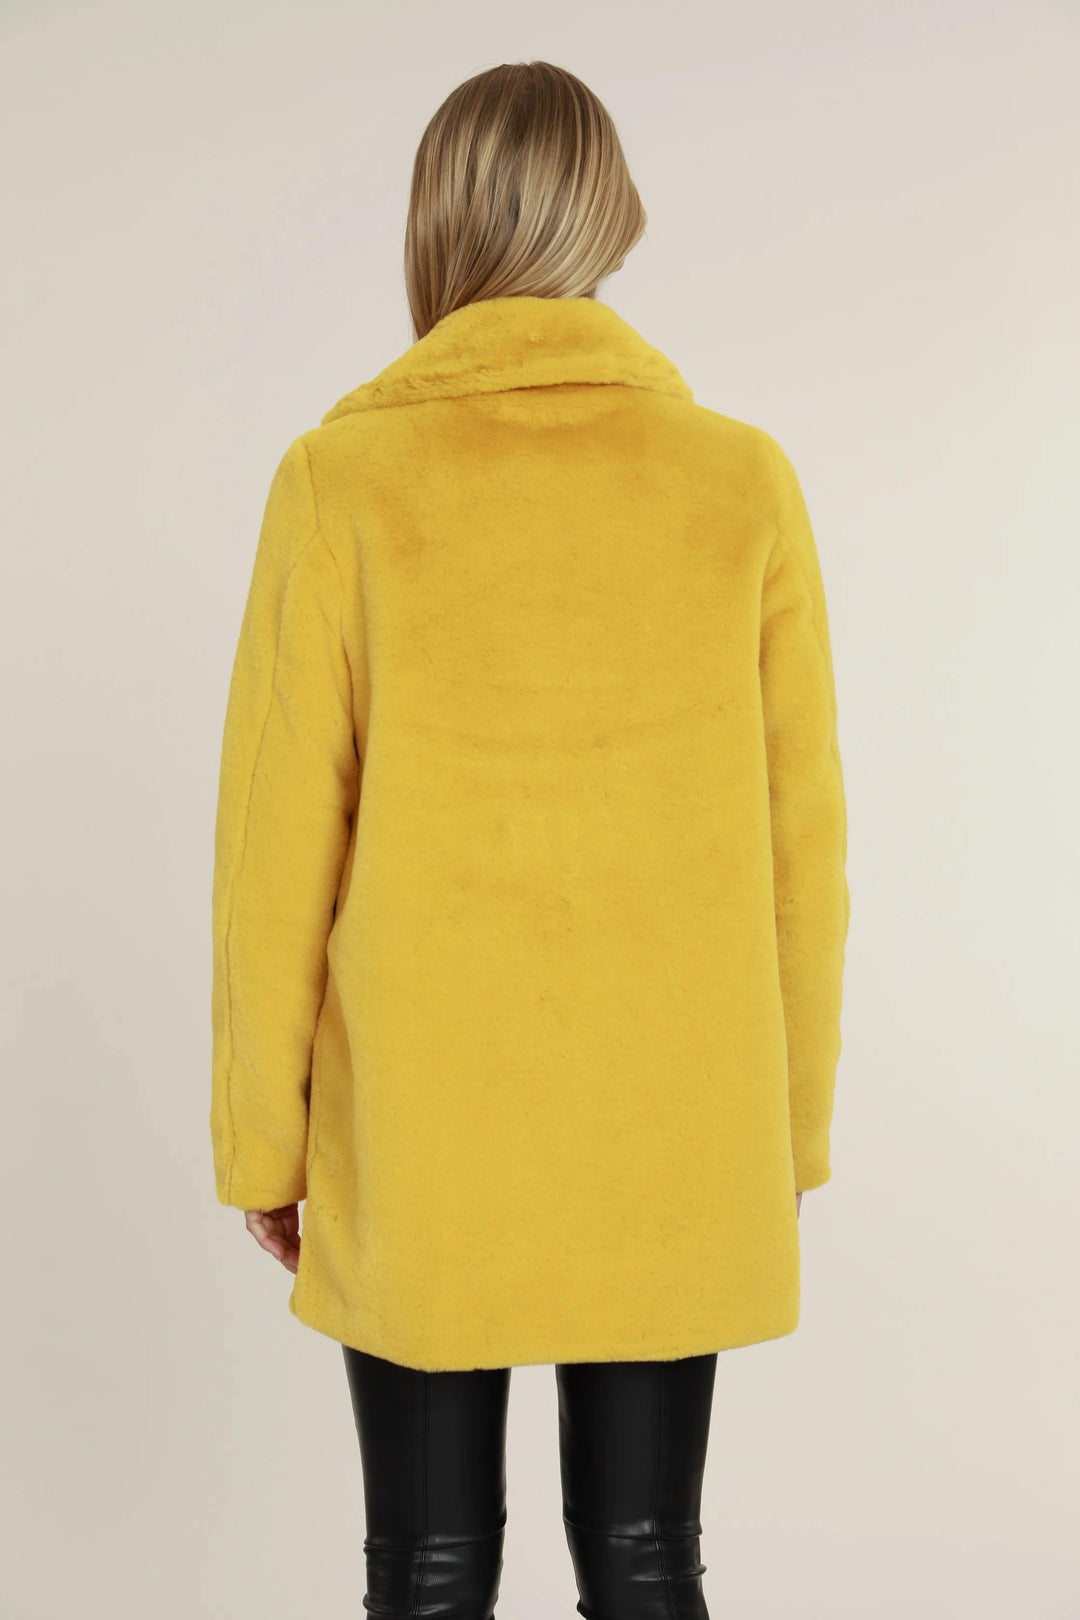 faux fur calf length coat yellow womens gift holiday boutique Dolce Cabo